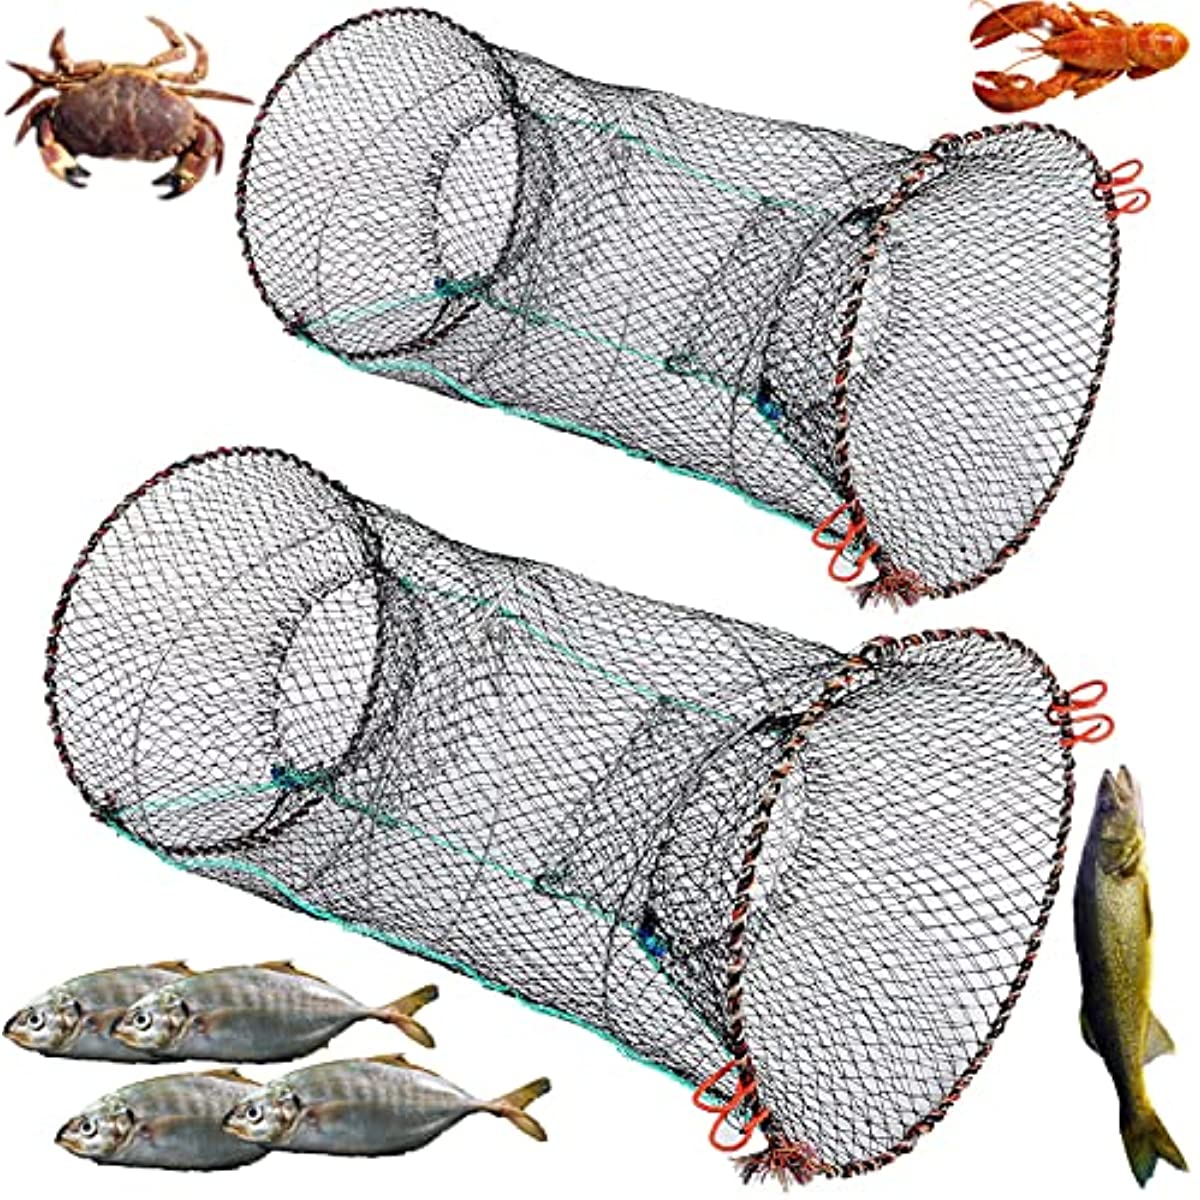 Lawaia Crawfish Trap Fish Trap Fishing Net Collapsible Crab Trap/Portable  Minnow Trap Folded Cast Net with Float and Chain for Shrimp,Lobster,Crab